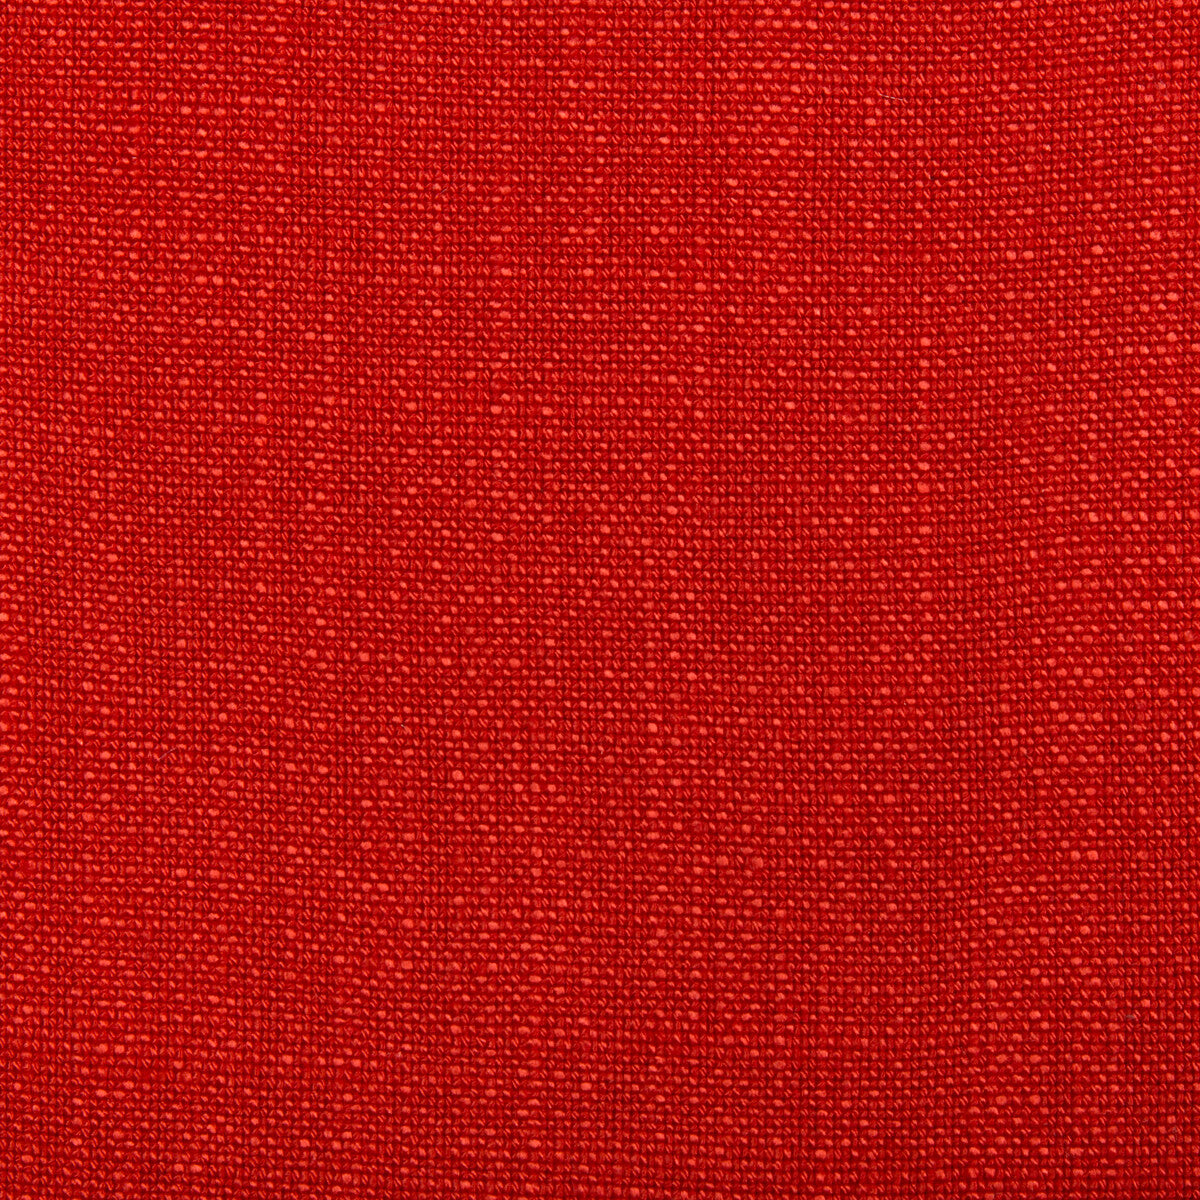 Andelle Plain fabric in red color - pattern 8017158.19.0 - by Brunschwig &amp; Fils